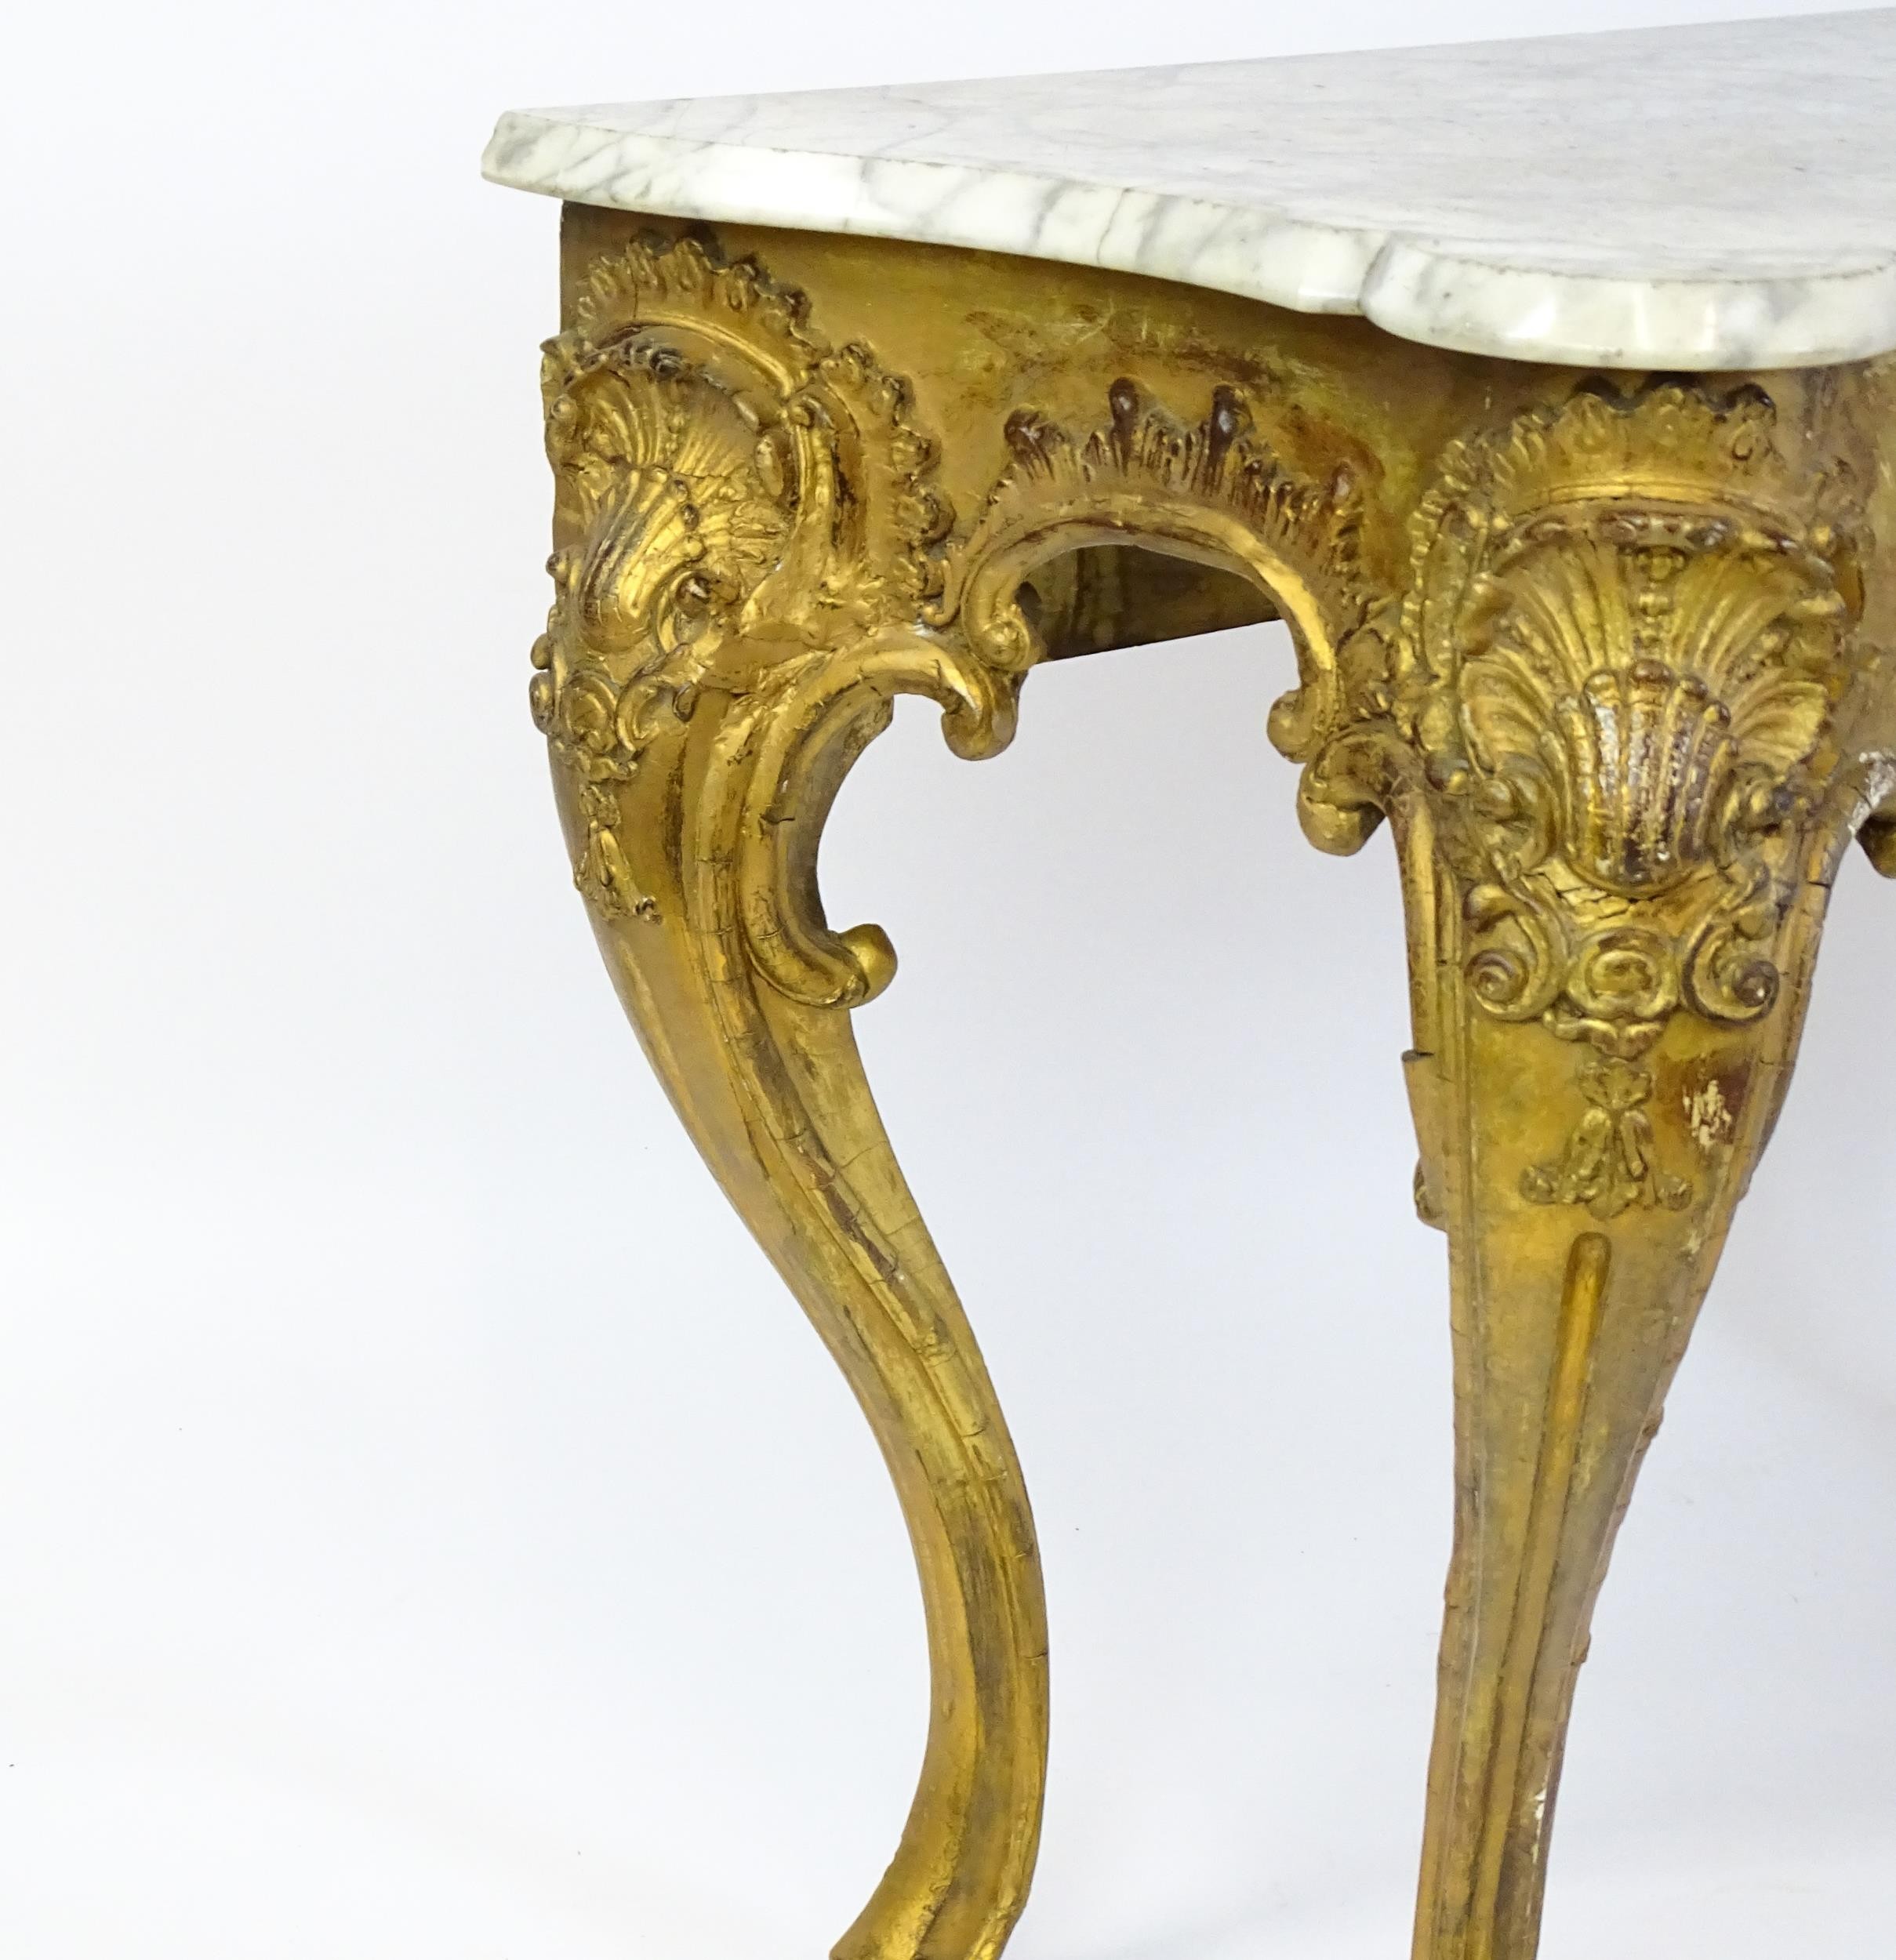 A 19thC marble topped table with a gesso and giltwood moulded base, decorated with shells, - Image 3 of 8